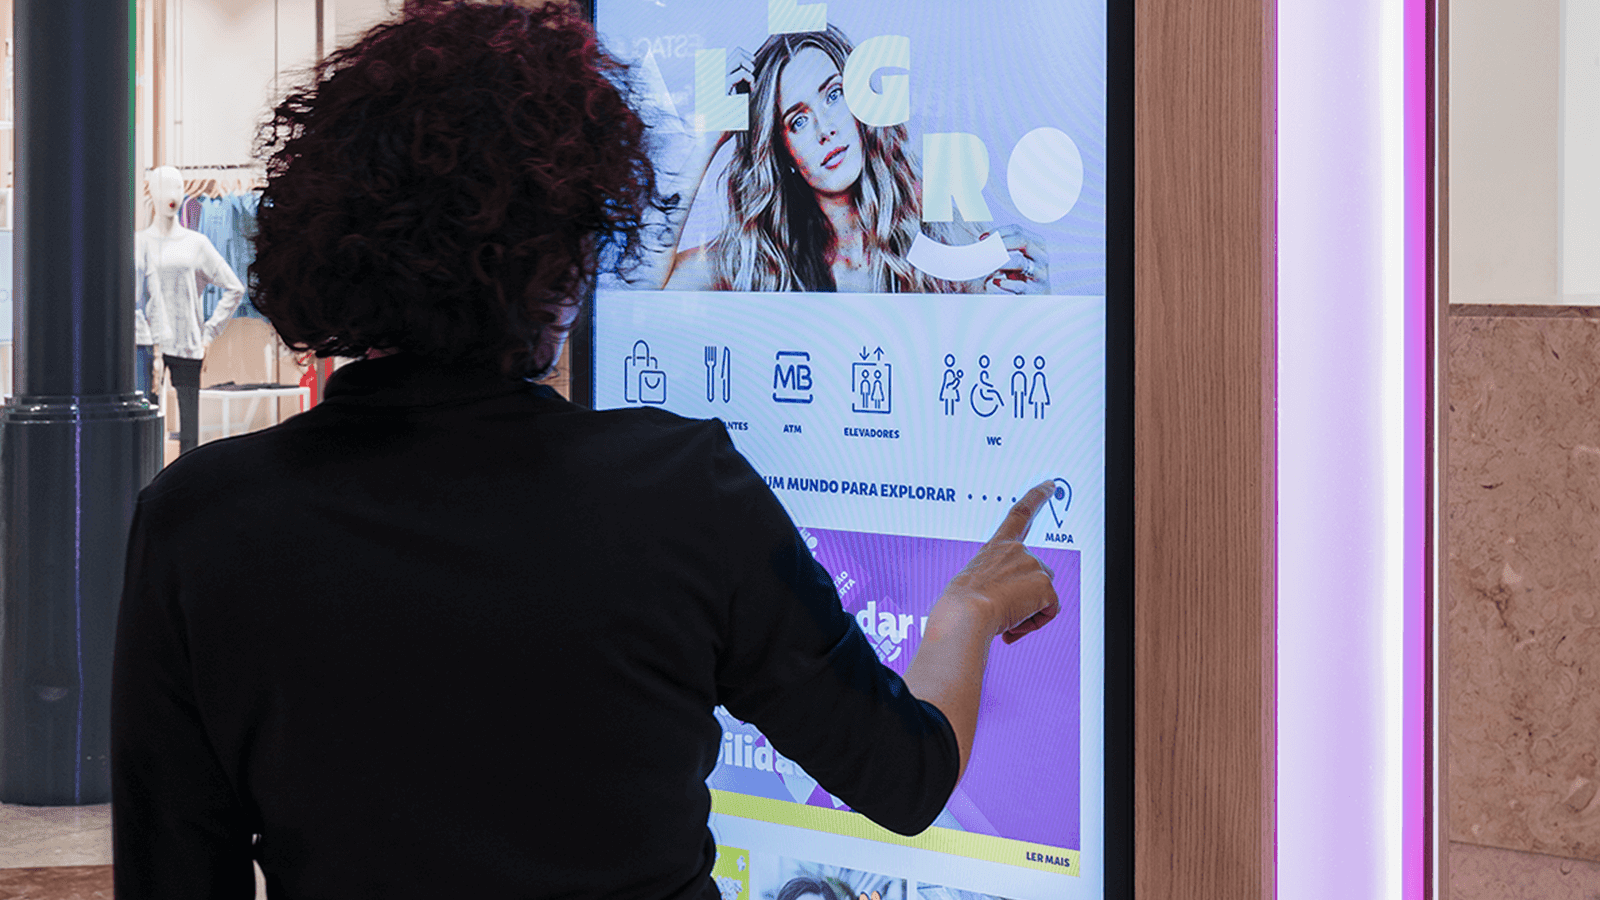 SKIN DUALTOUCH for indoor interactive kiosks